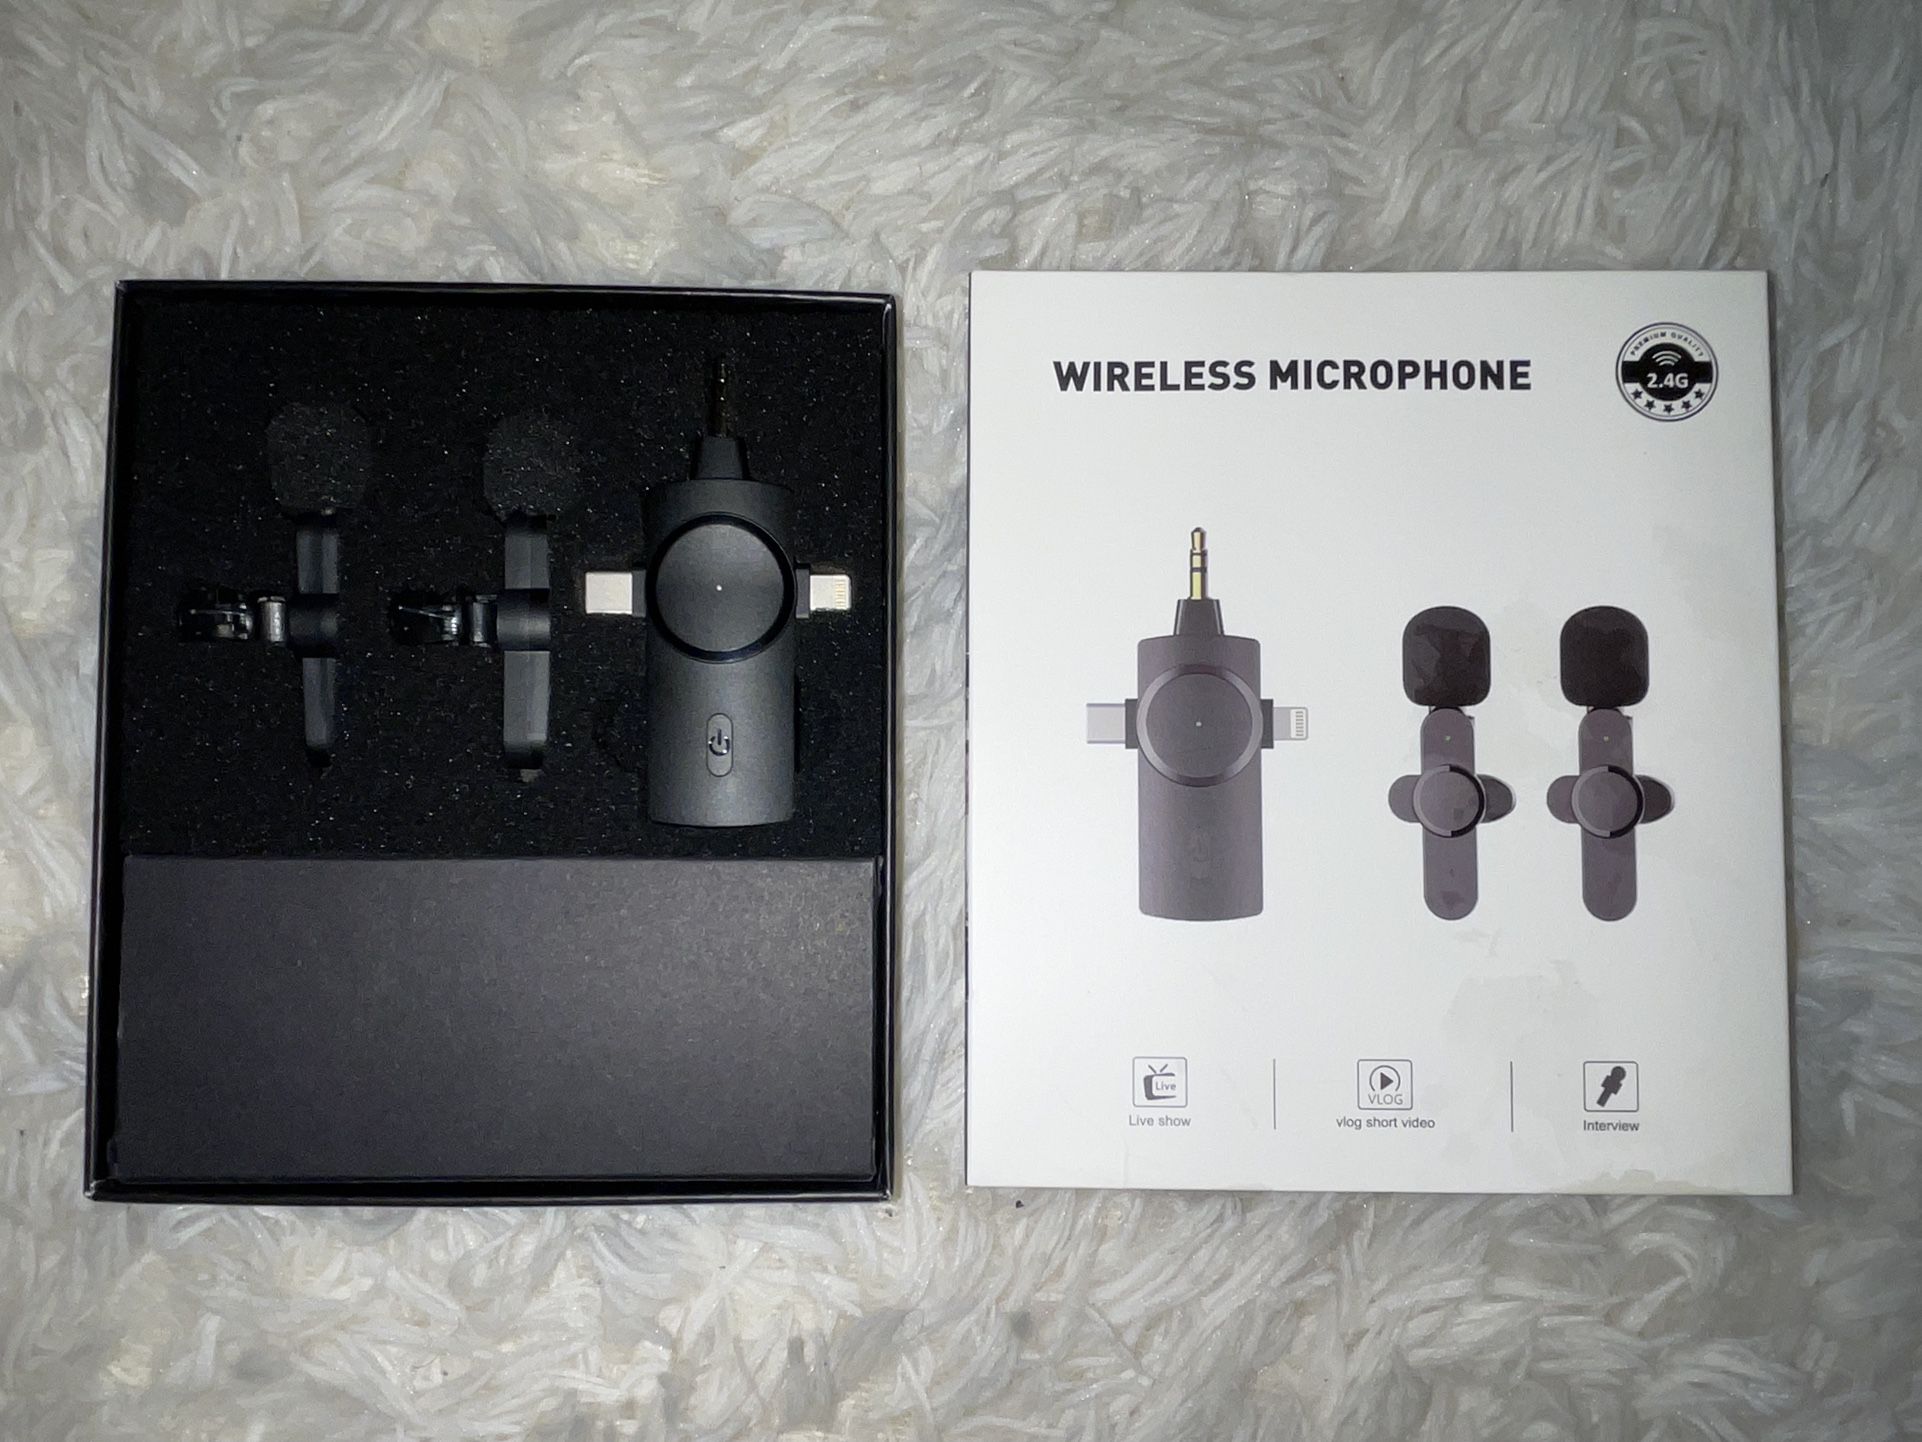 Wireless Microphone (IPhone, Android, 3.5 mm jack)